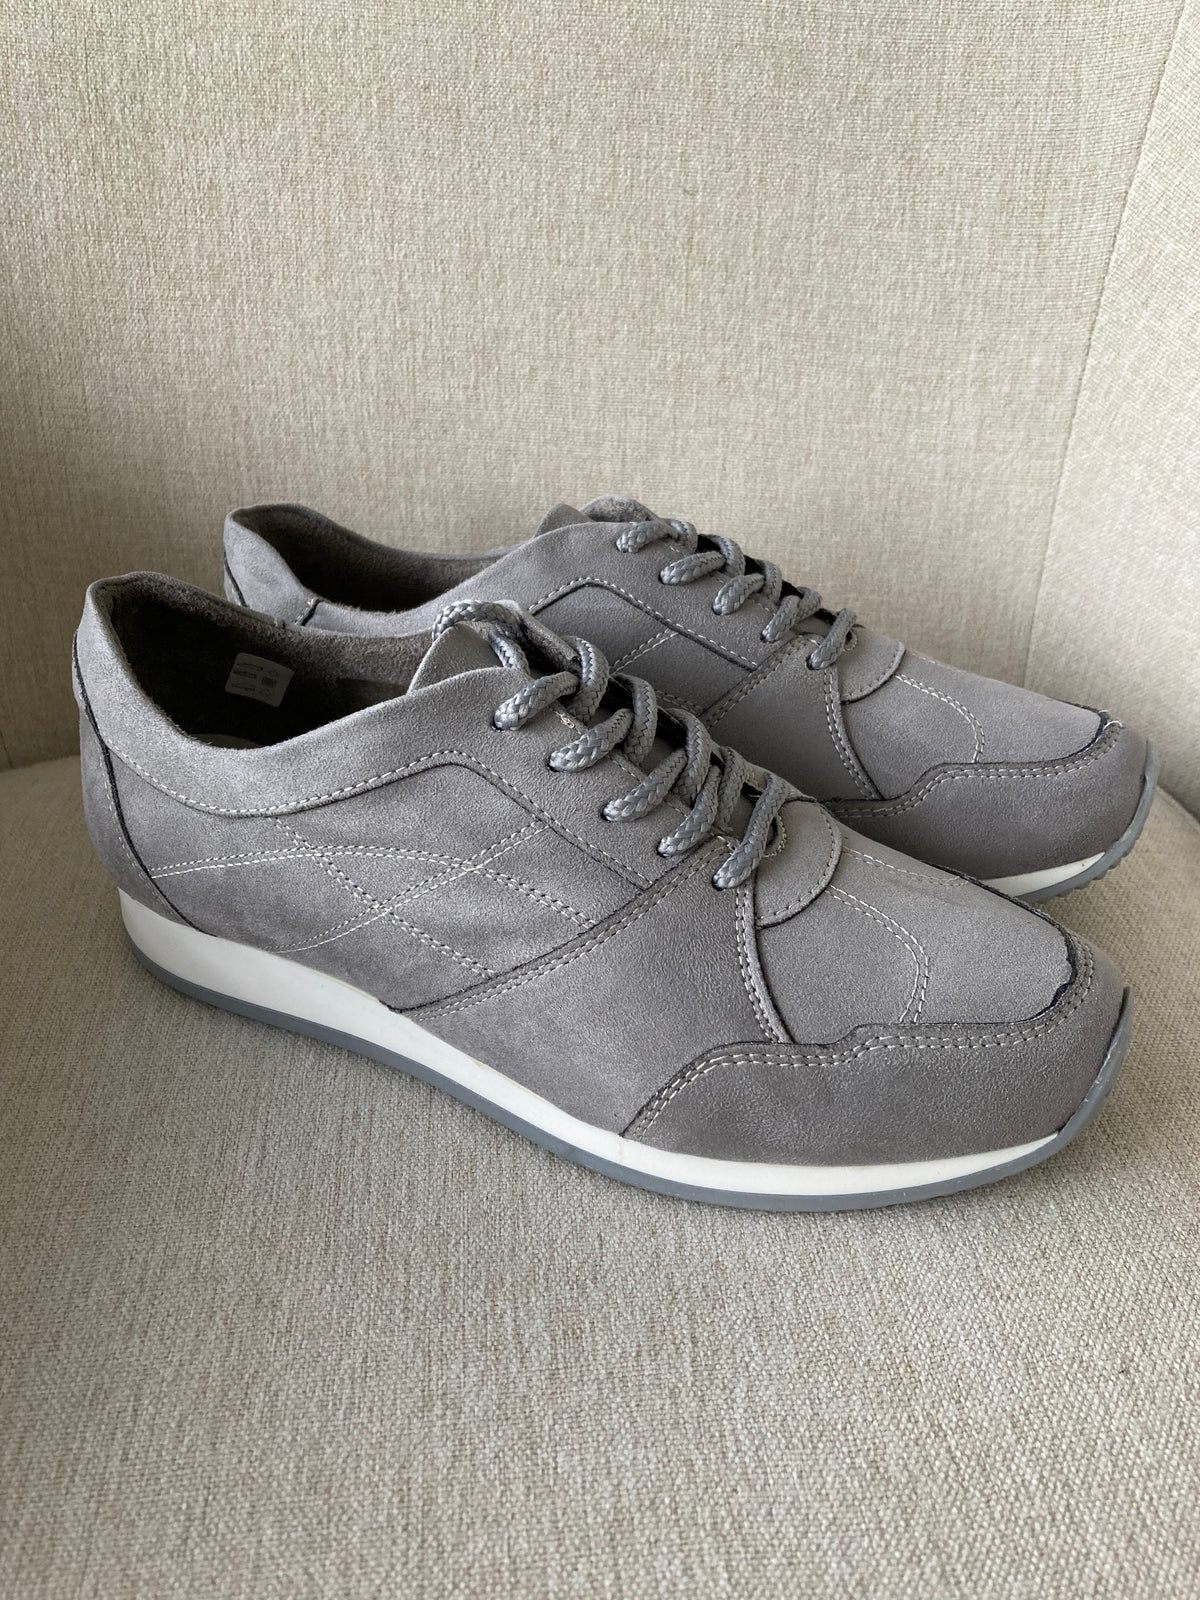 Grey Suede lace up trainers by AIRSOFT - Size 6